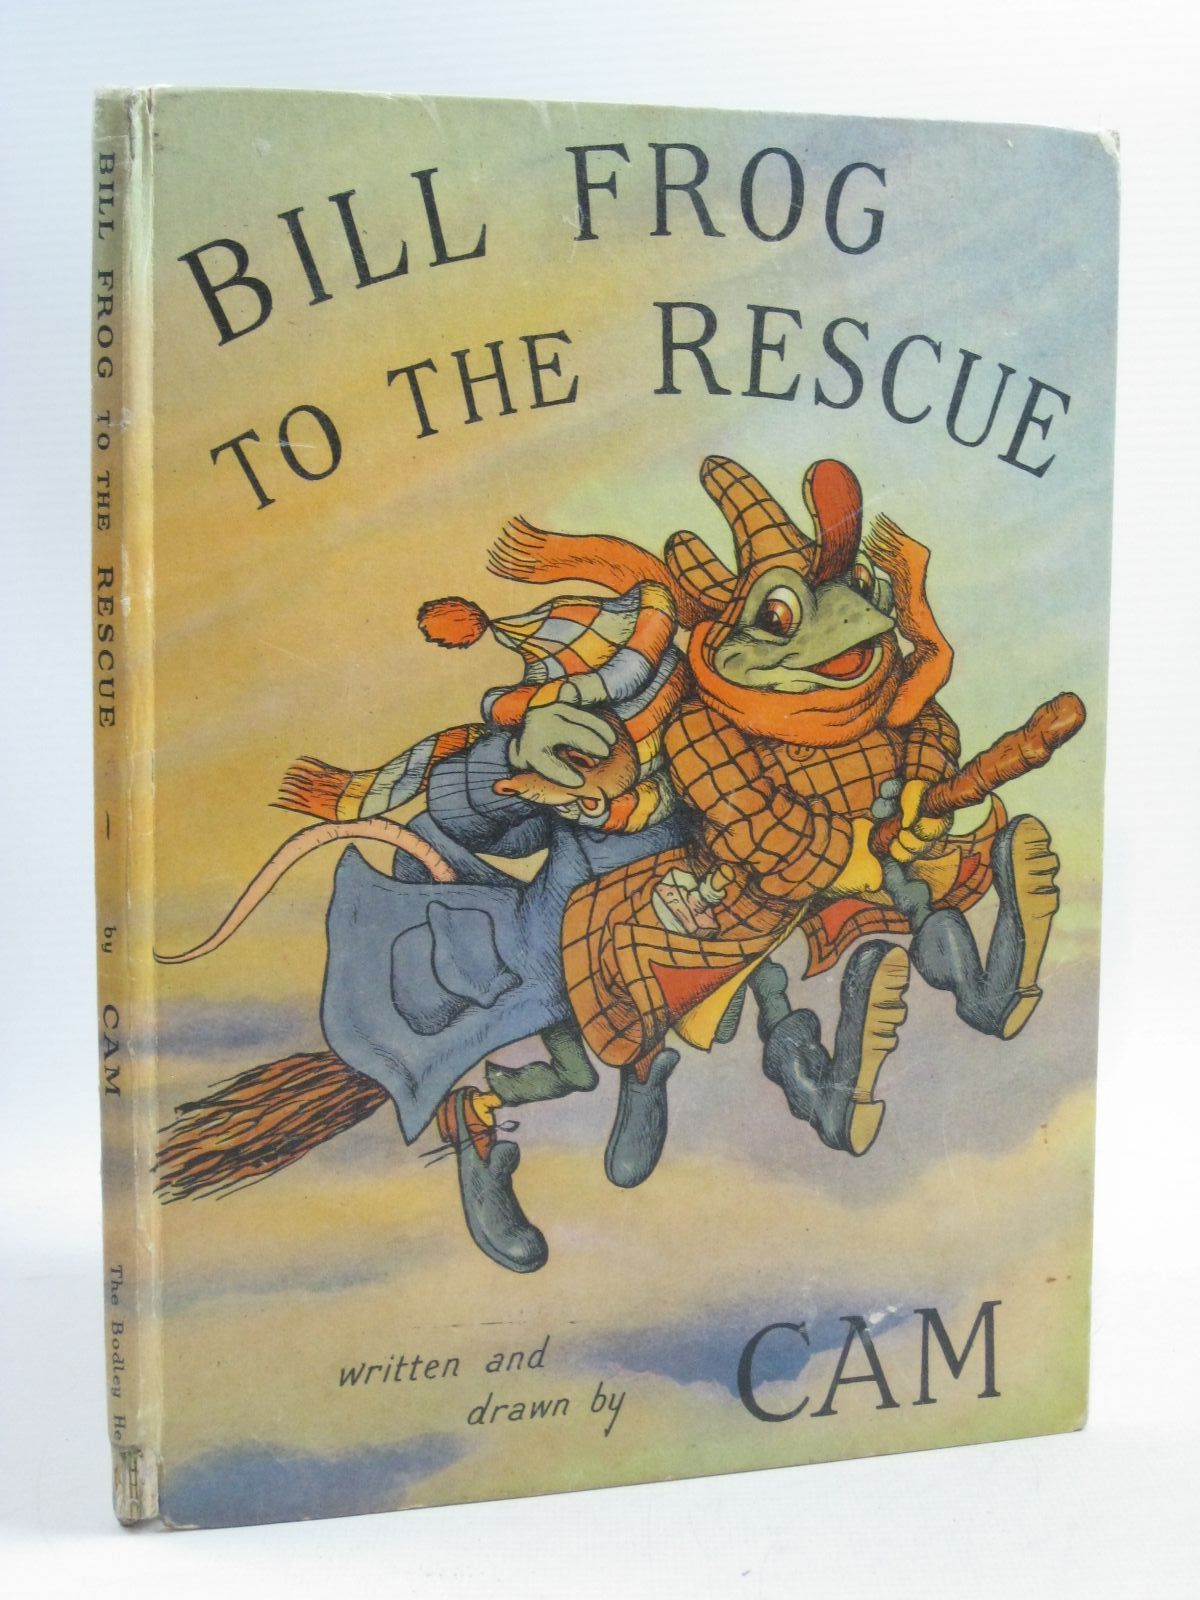 Bill Frog To The Rescue